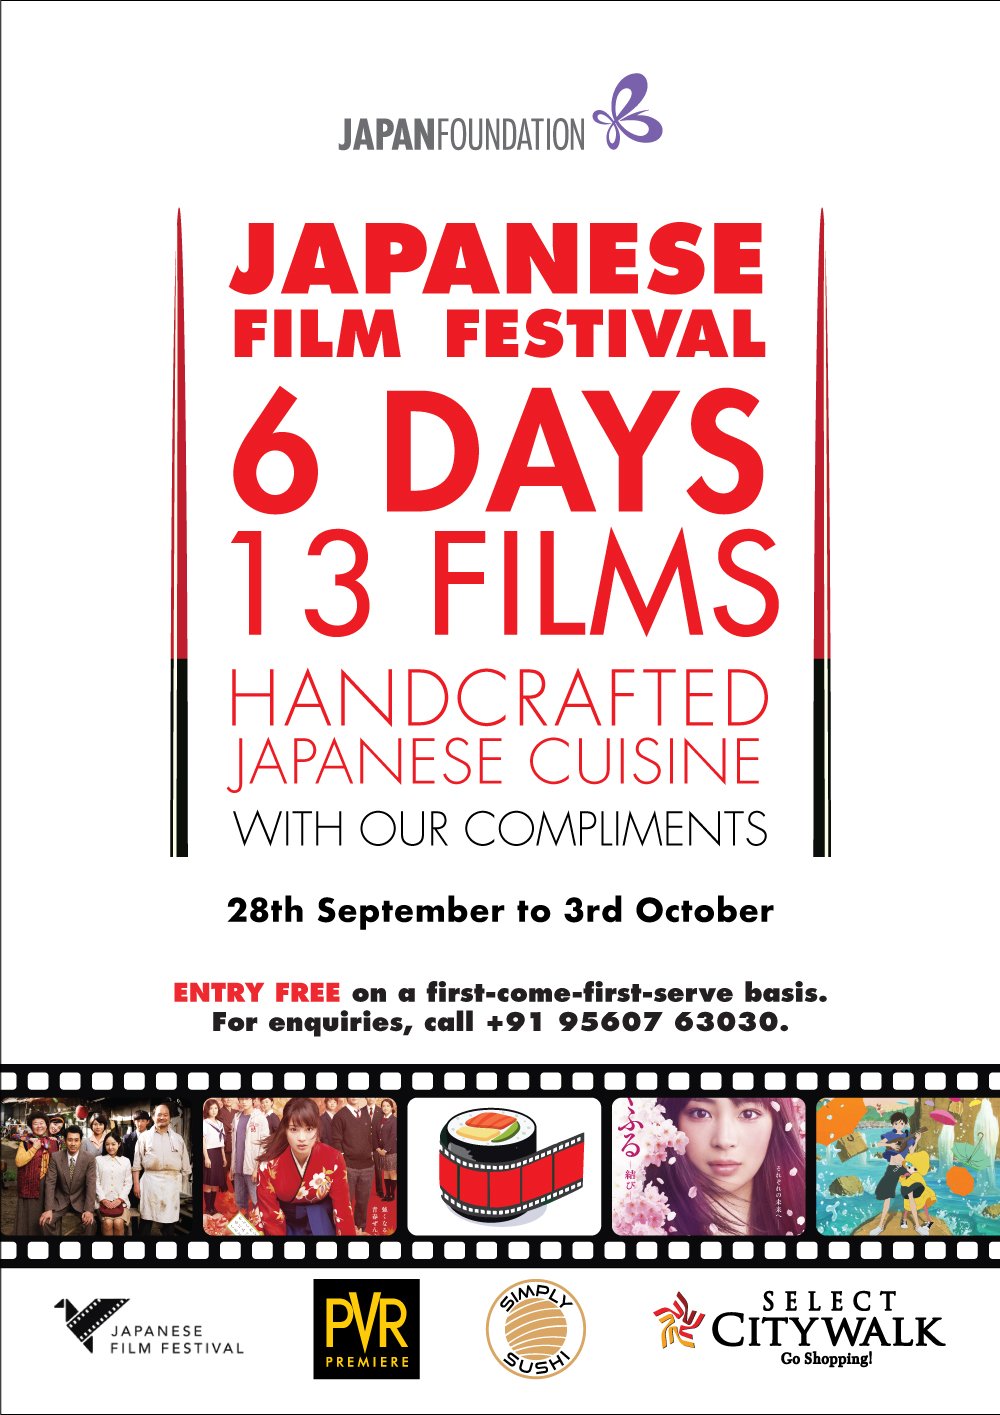 Here Is Why You've Got To Attend This Japanese Film Festival! DforDelhi